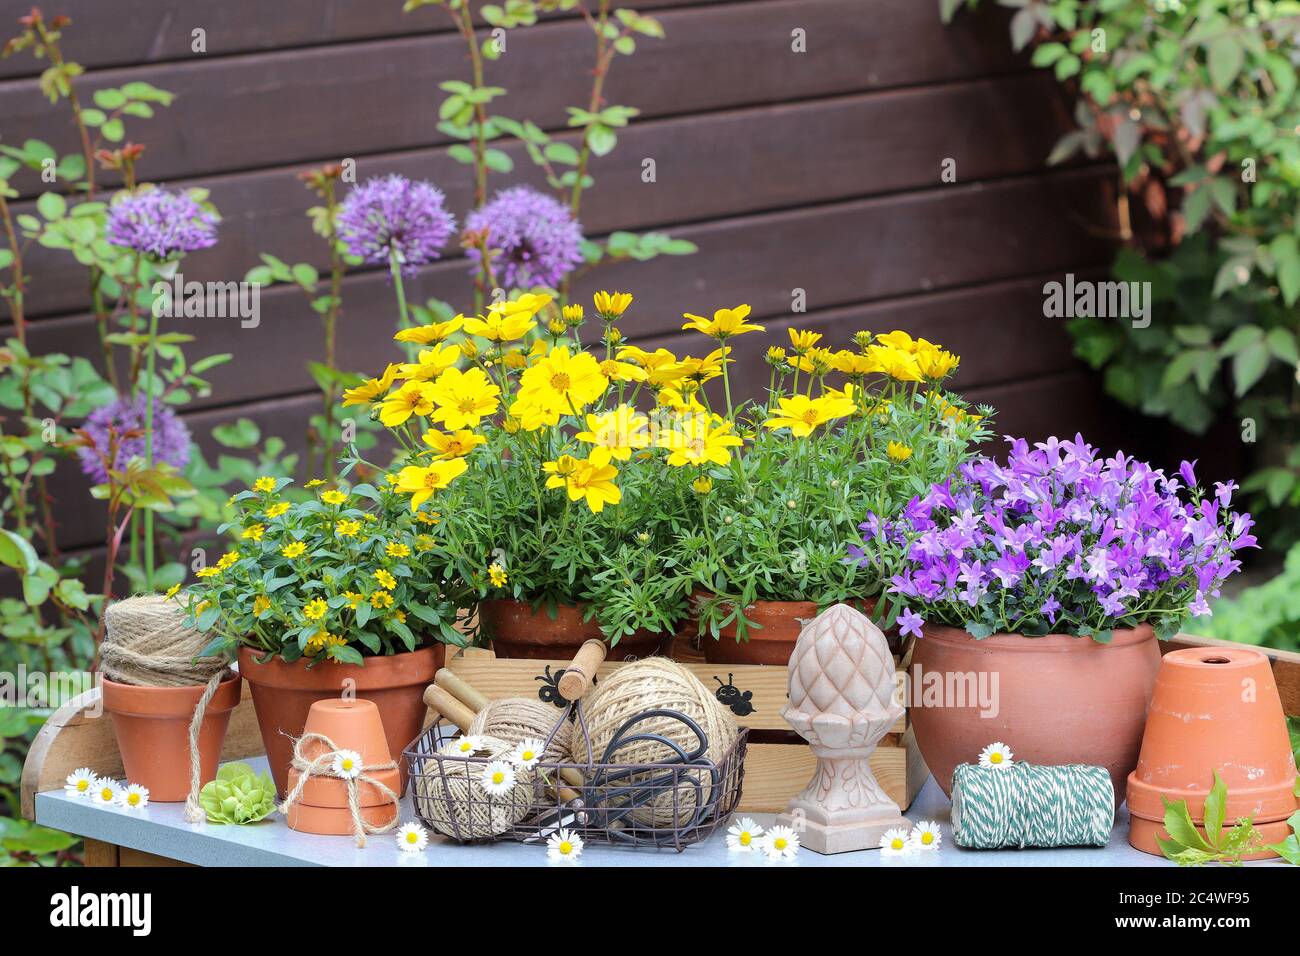 rustic garden decoration with flowers in purple and yellow Stock Photo